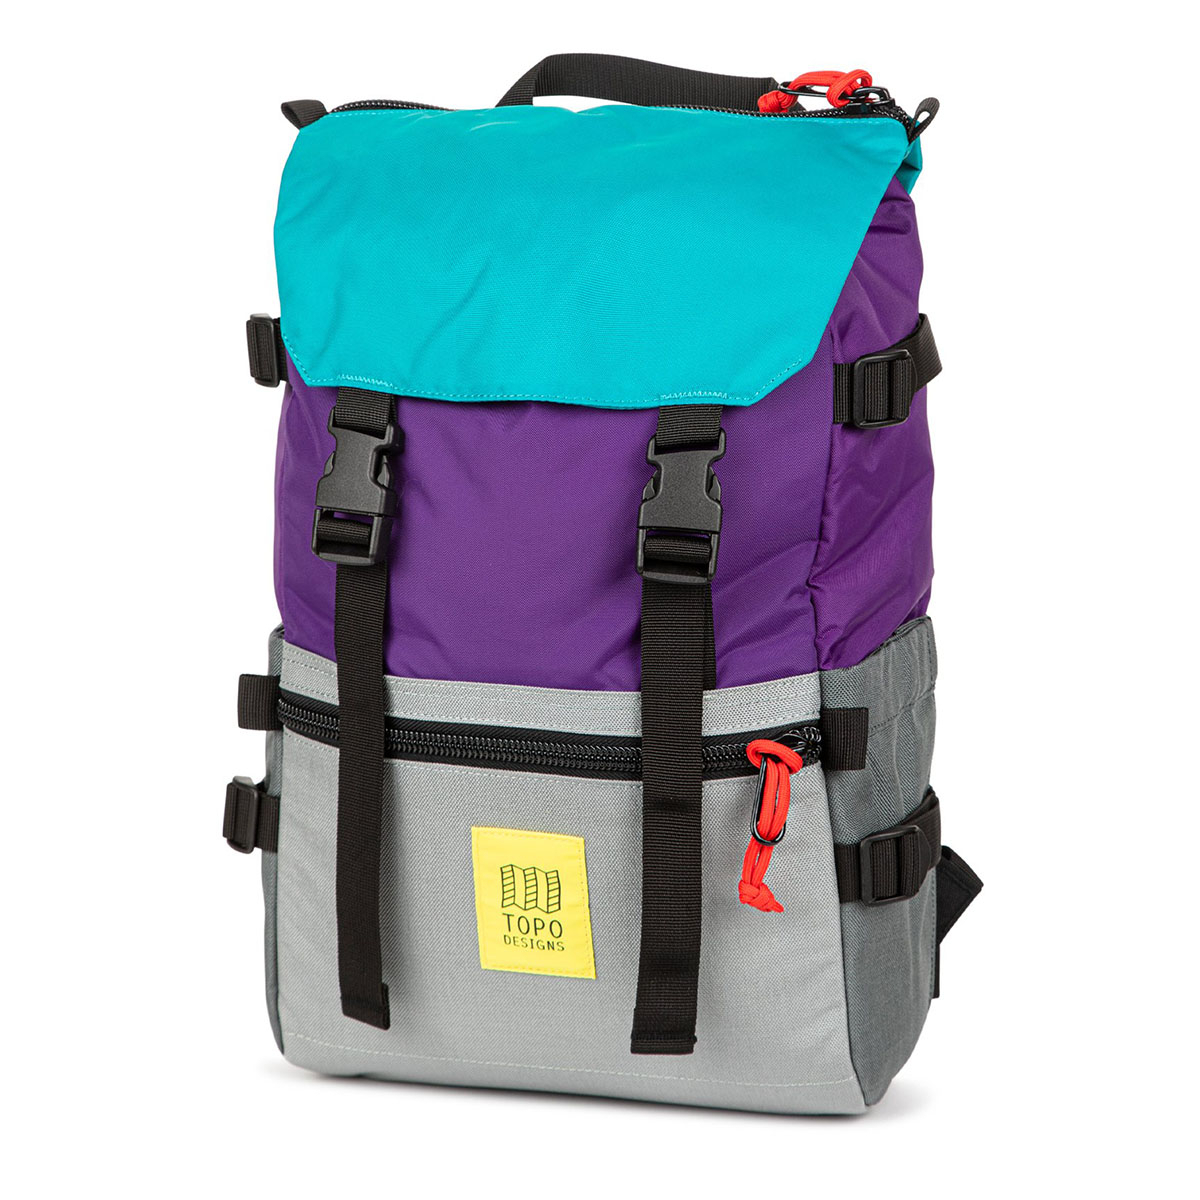 Topo Designs Rover Pack Classic Purple/Silver/Turquoise